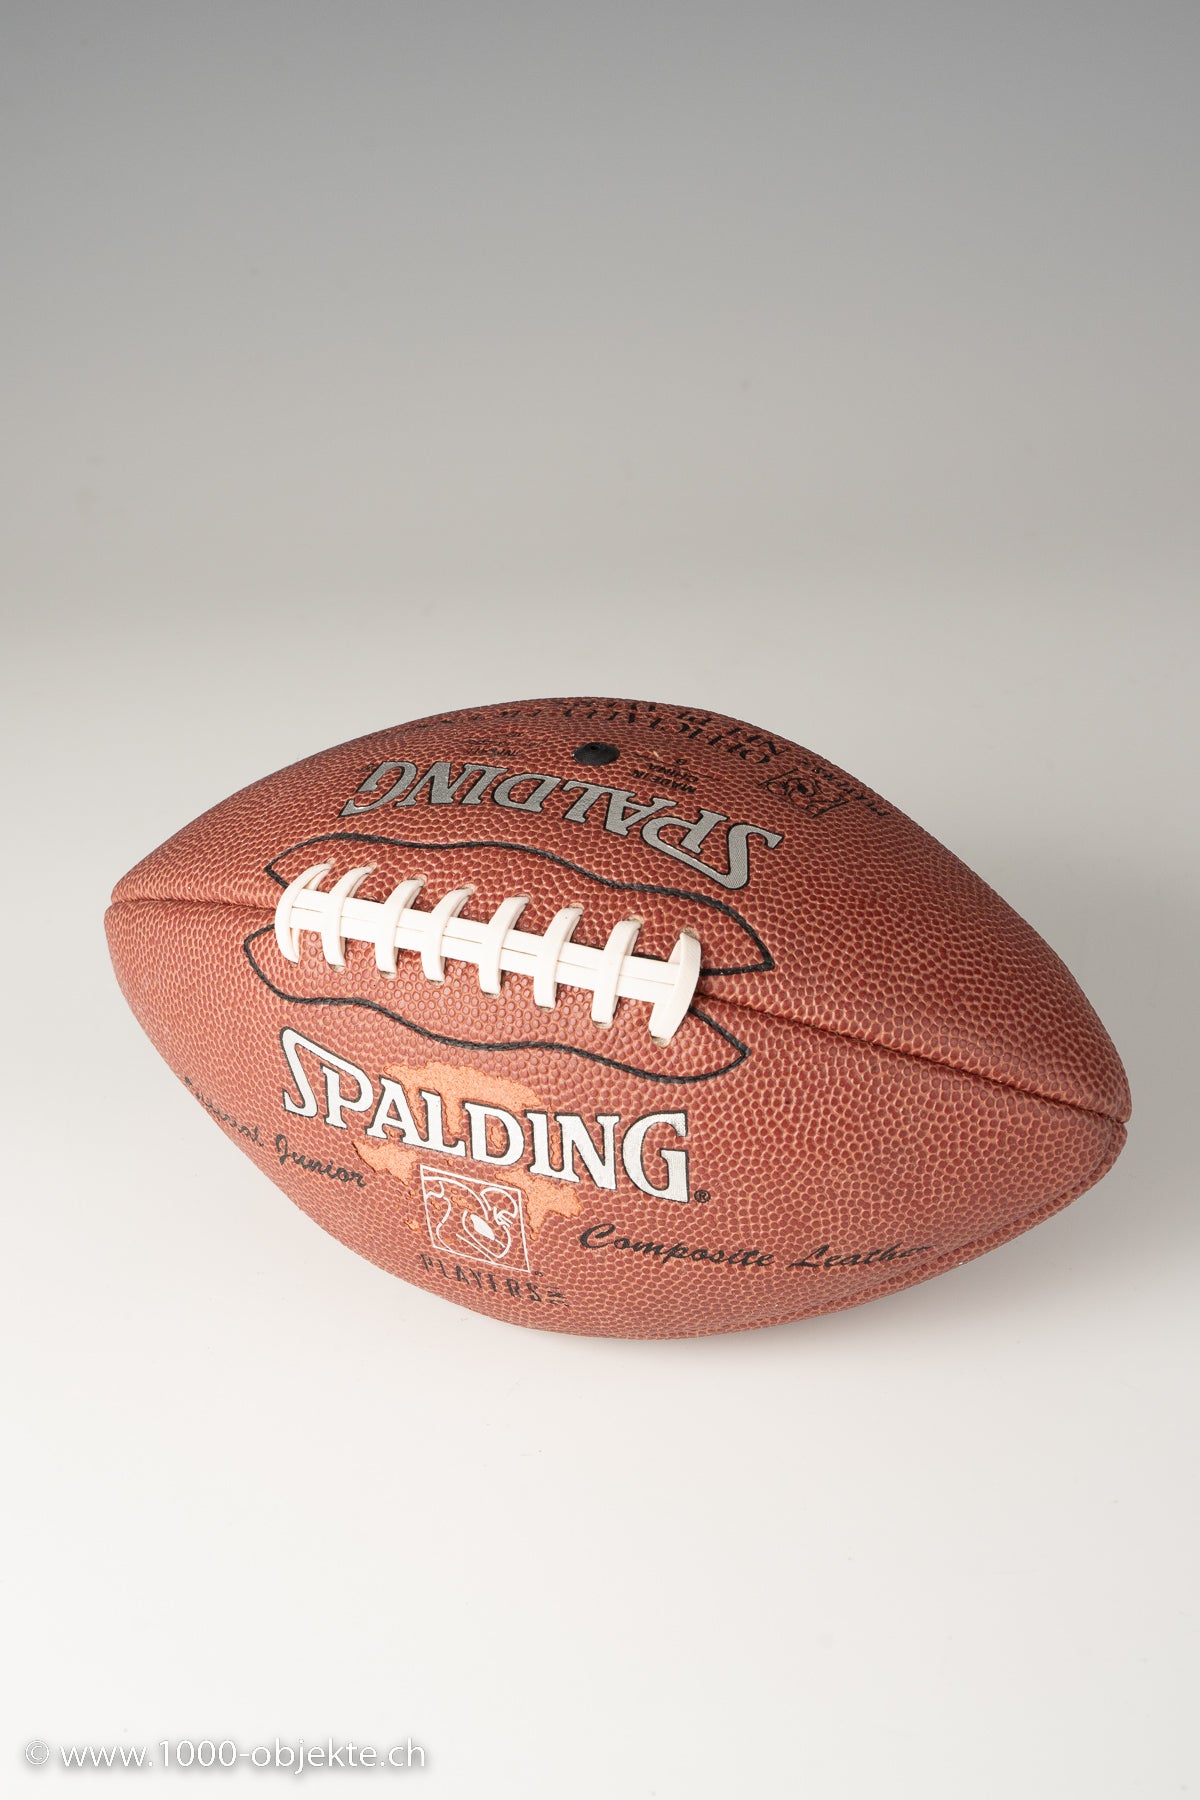 Signed Spalding Football Players Inc. official NFL player exclusive